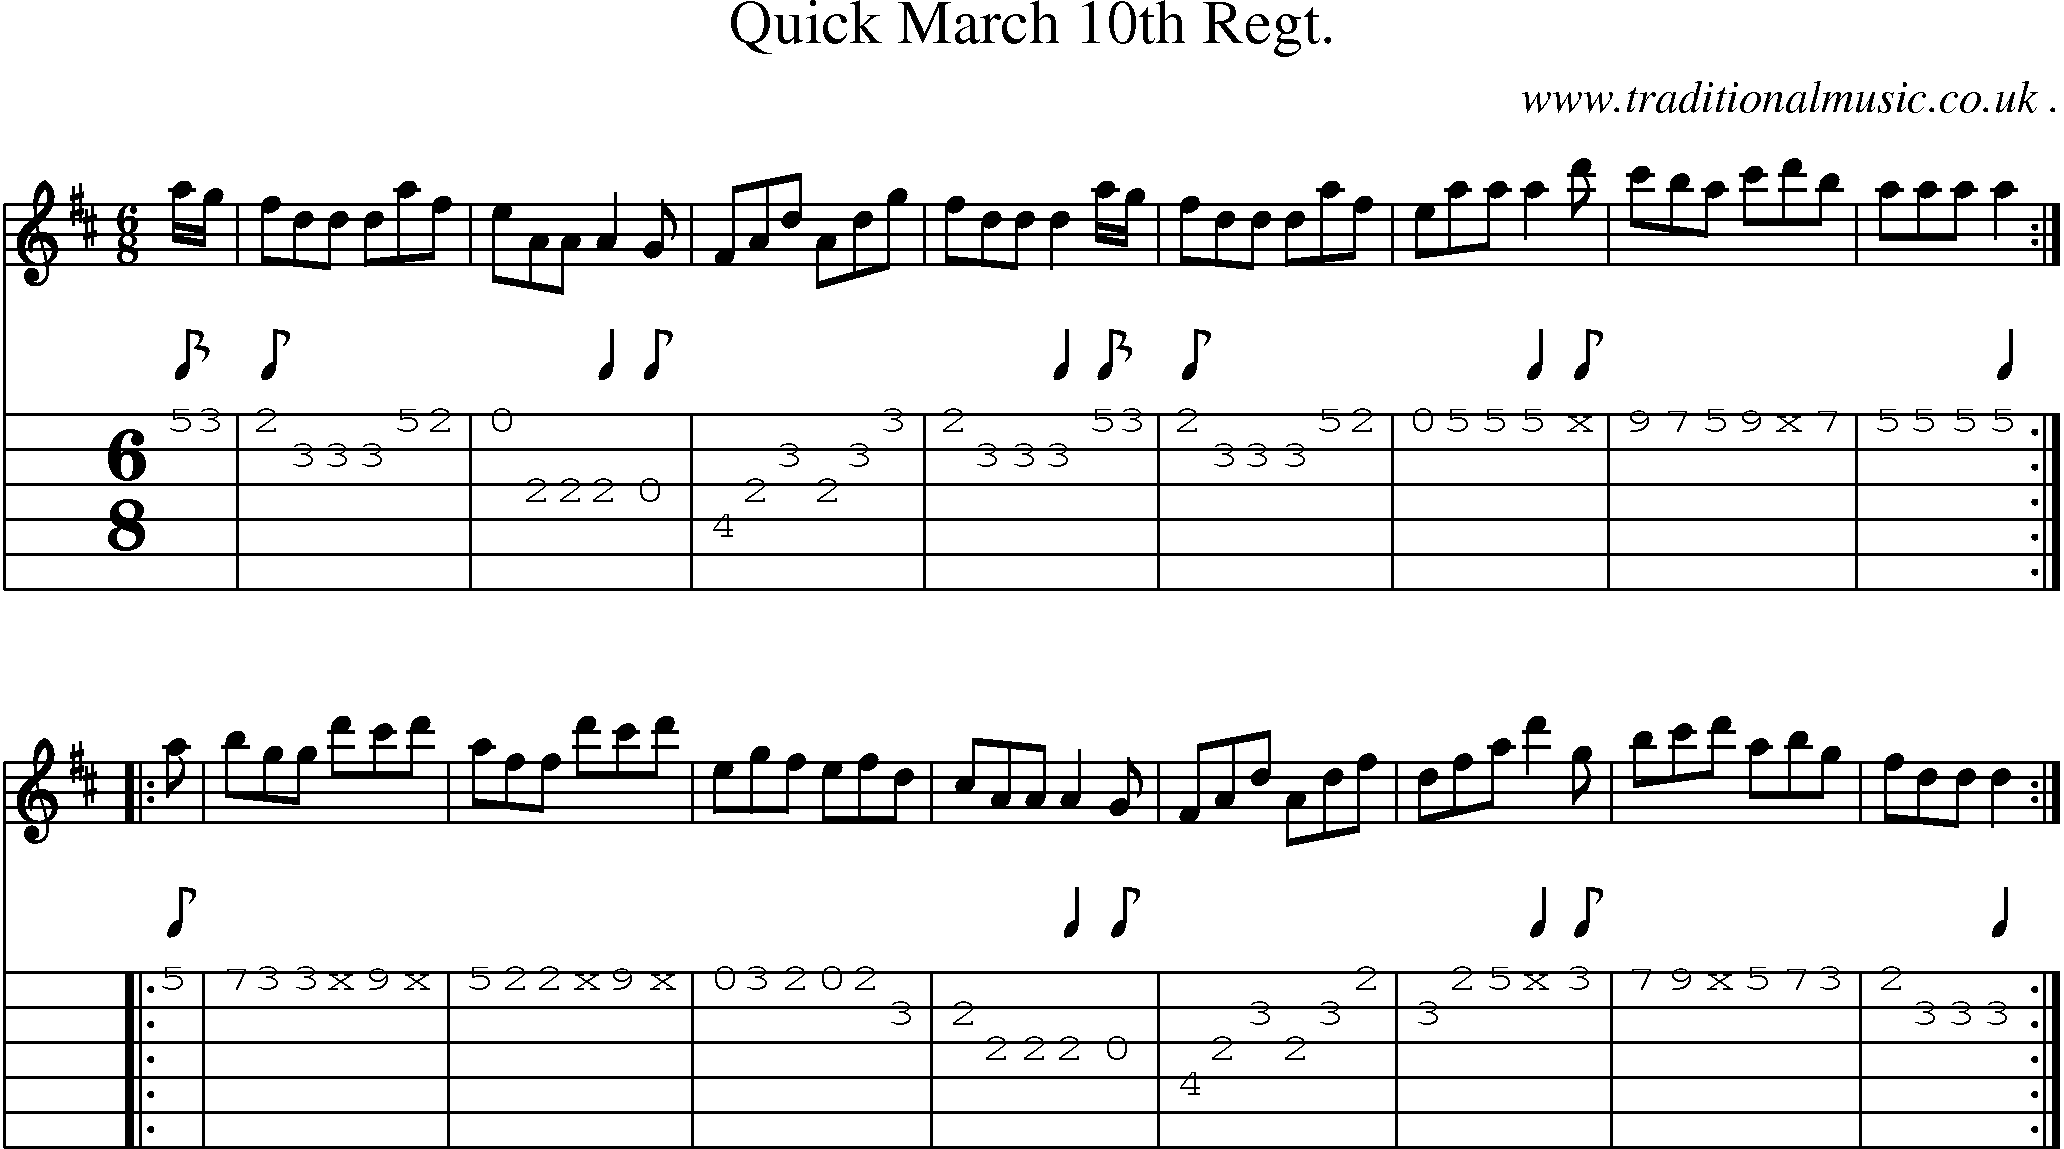 Sheet-music  score, Chords and Guitar Tabs for Quick March 10th Regt